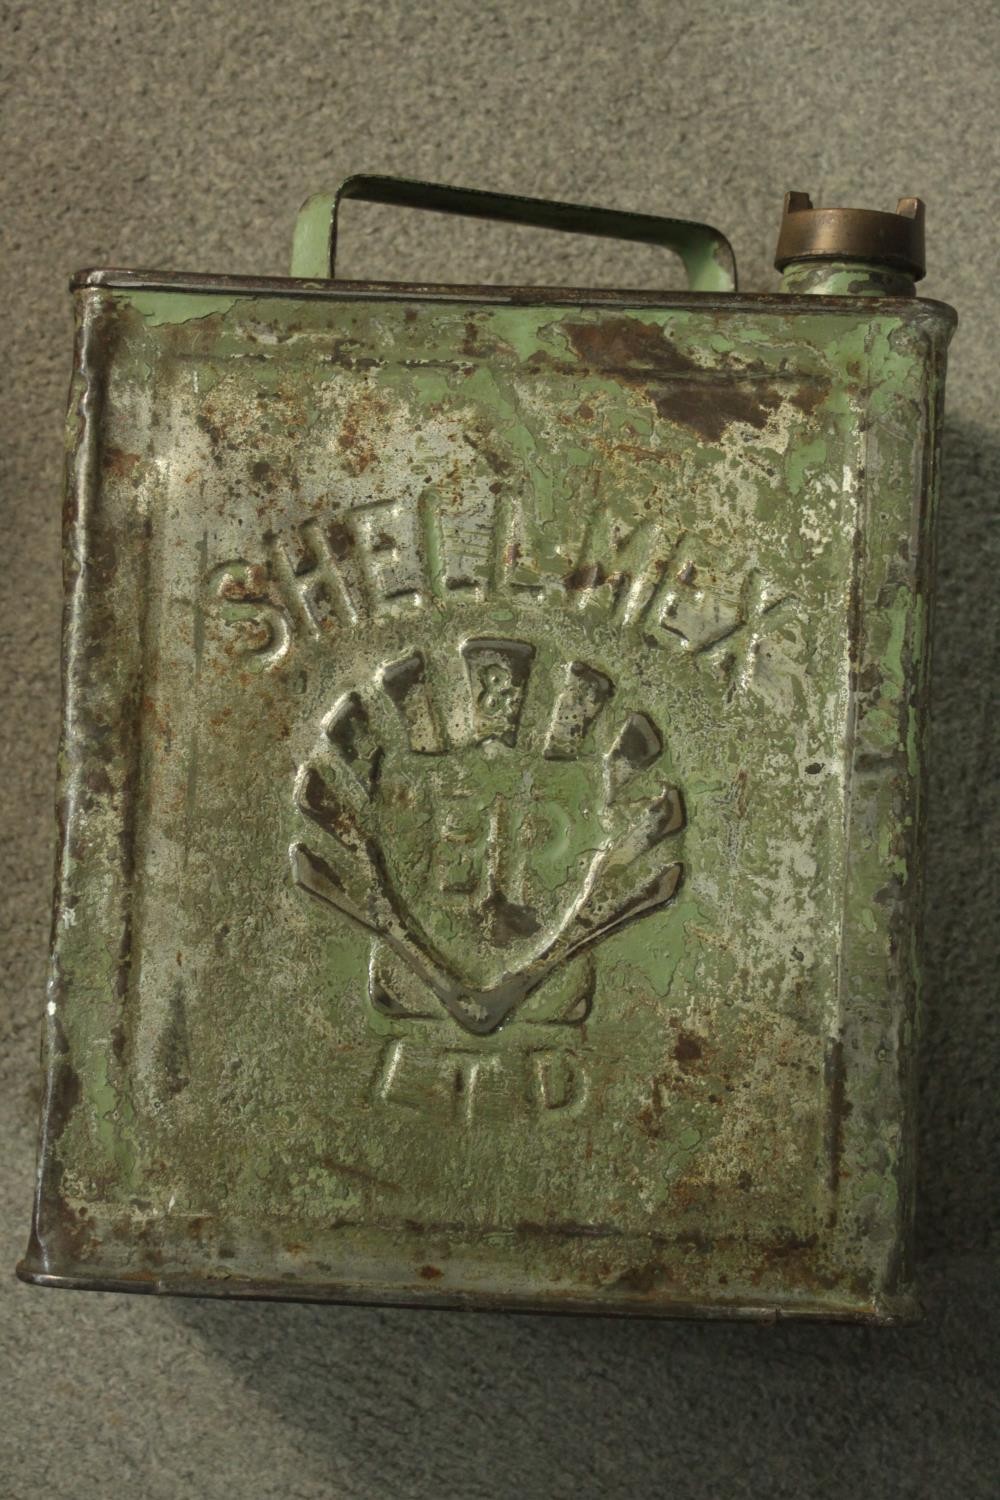 Four 20th century painted metal Jerry cans, marked for O-D-M Ashford, Insect Repellent, BP Ltd Shell - Image 4 of 6